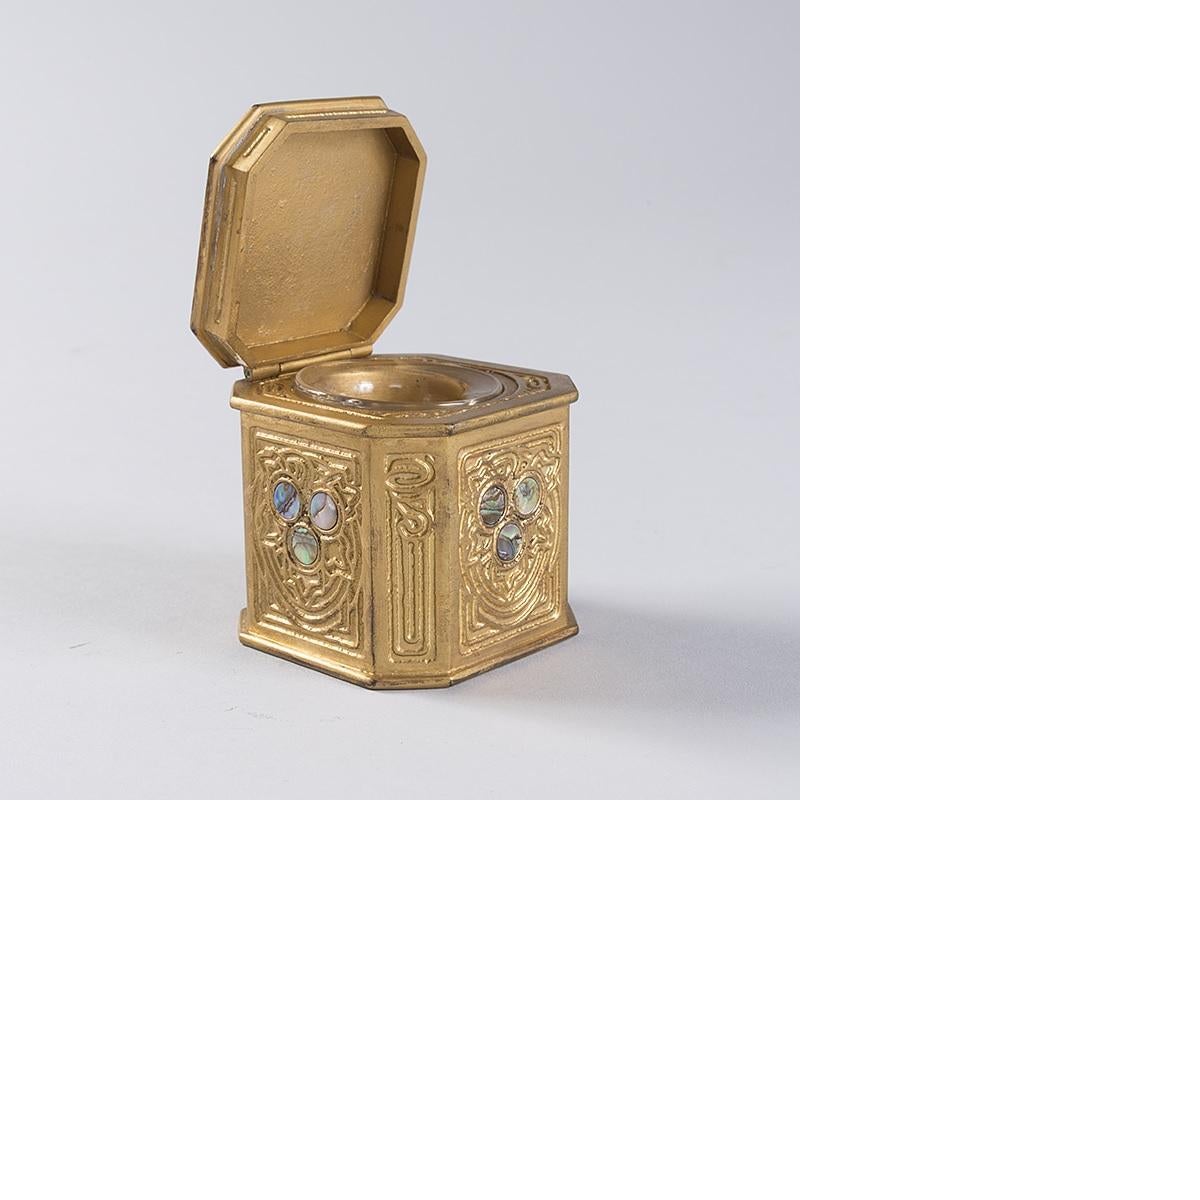 A Tiffany Studios New York gilt bronze and abalone inkwell, circa 1900.

For the desk set: pieces in the 